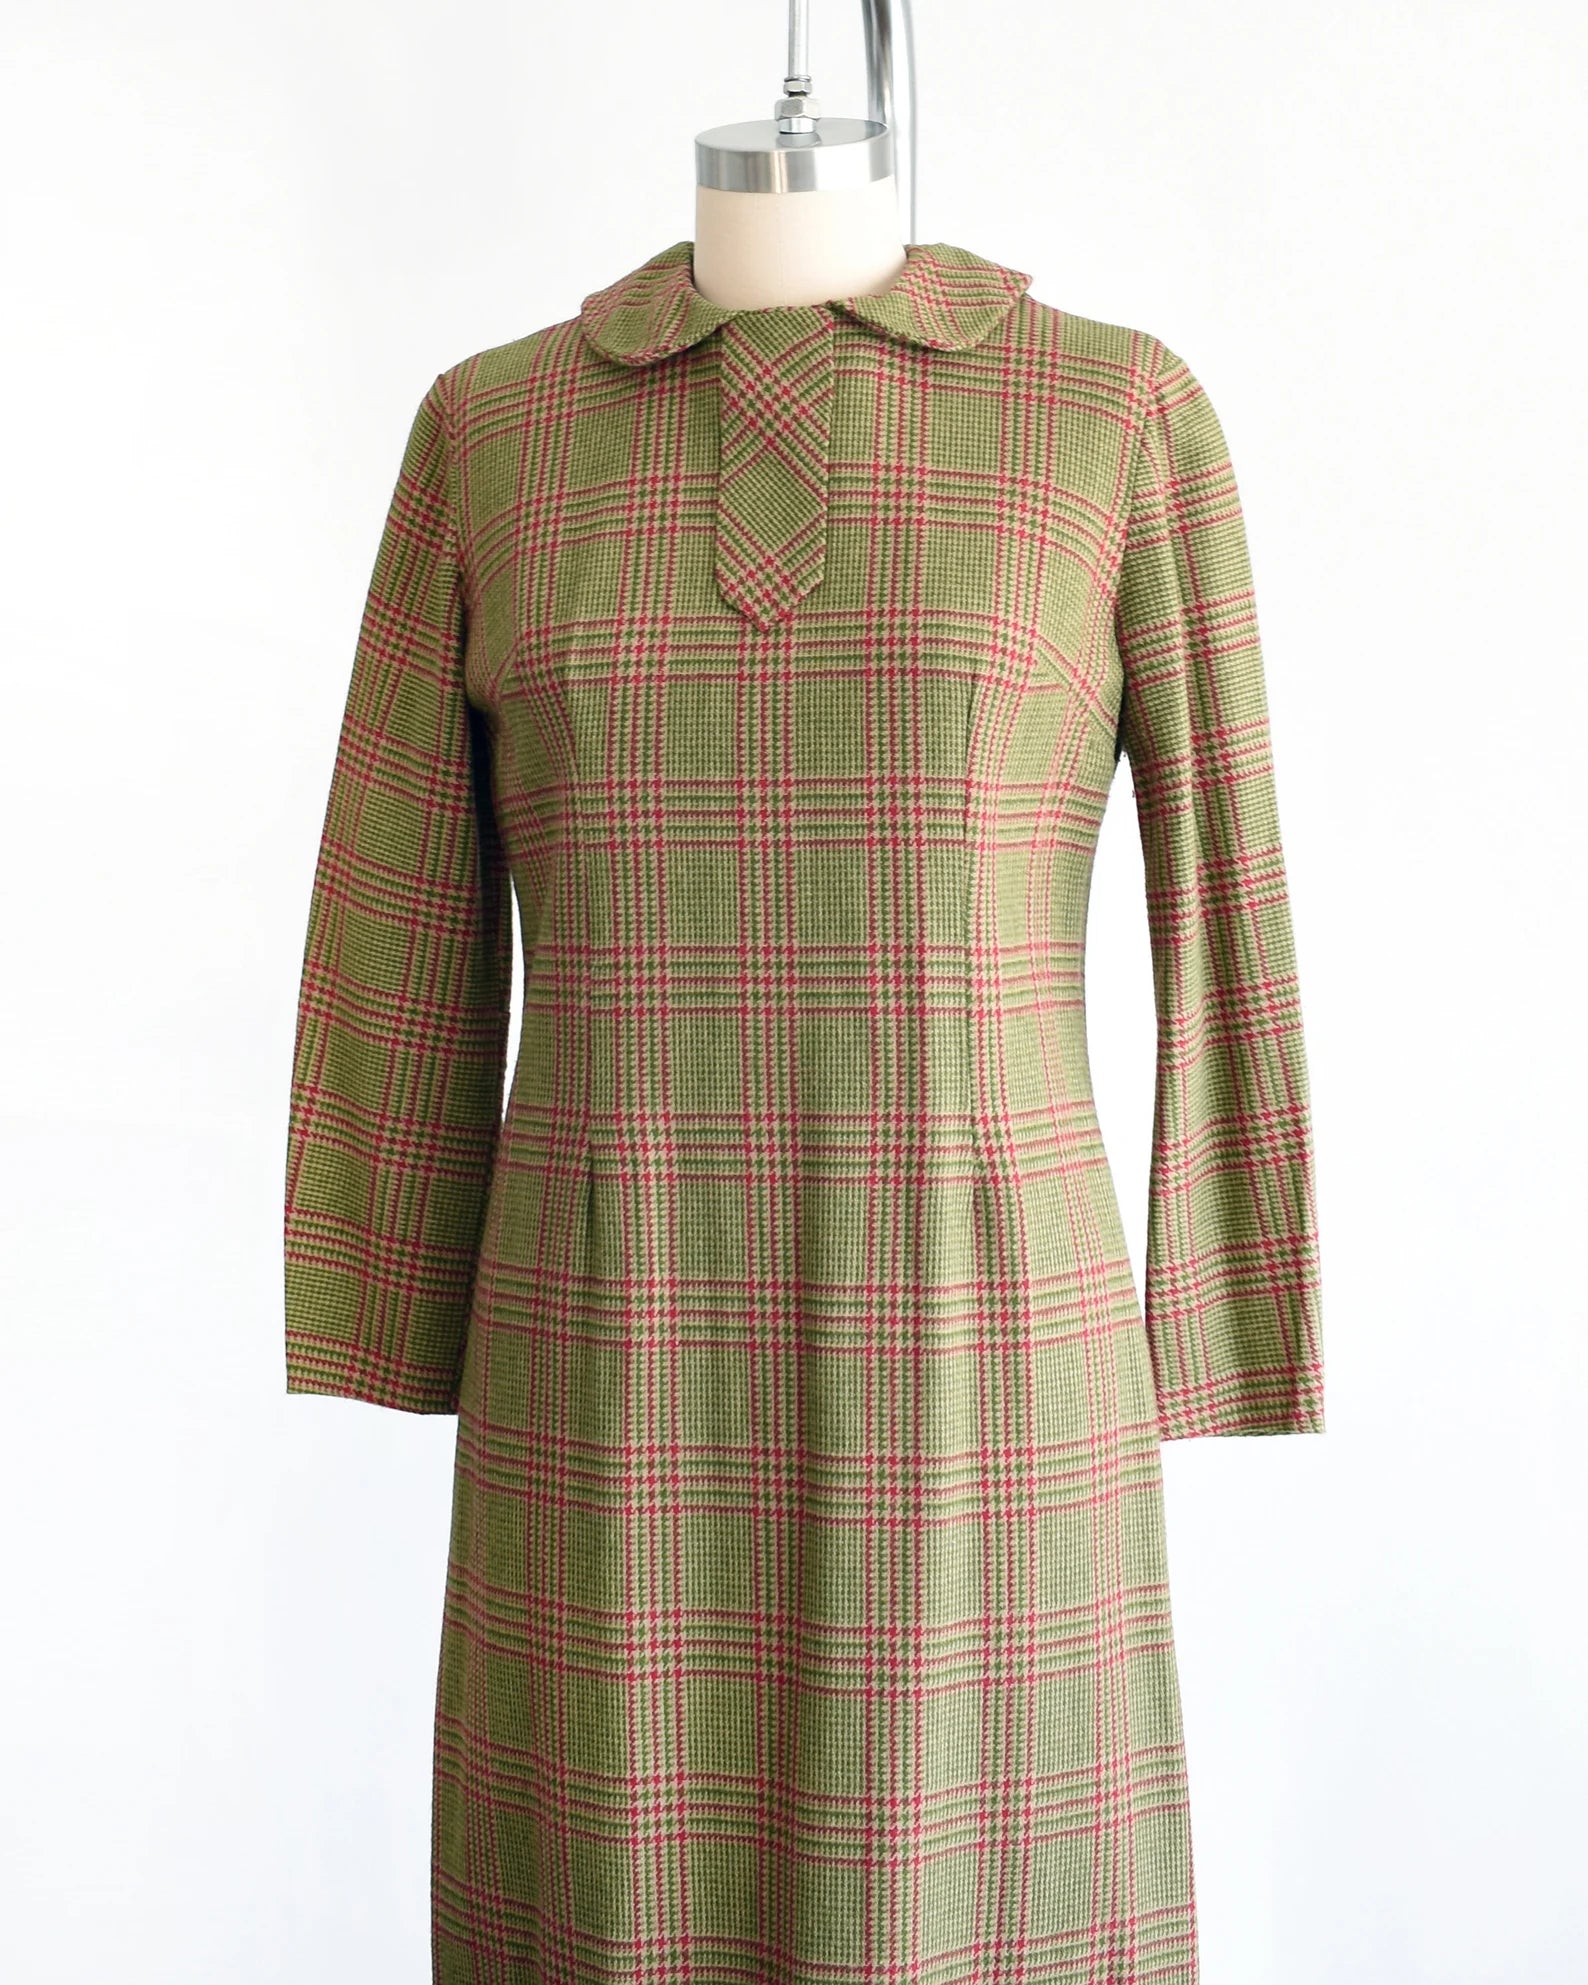 Side front view of a vintage 60s green and pink plaid wool dress with Peter Pan style collar and long sleeves. The dress is modeled on a dress form.